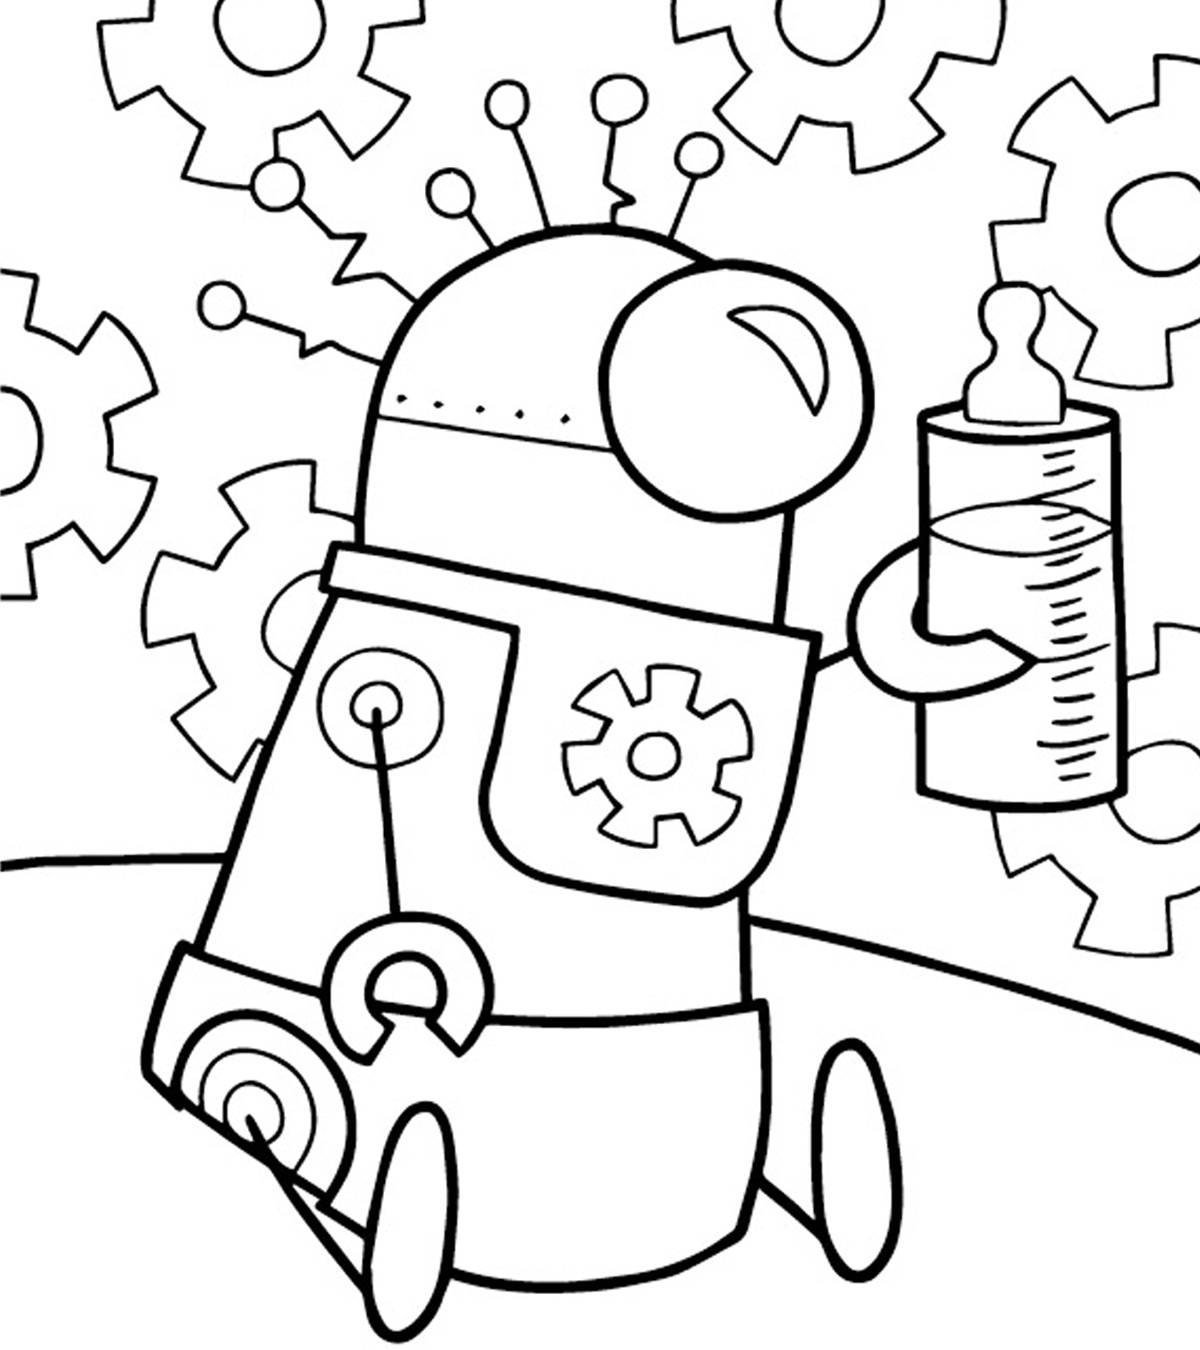 20 Cute Free Printable Robot Coloring Pages Online - coloring pages roblox colorings print and color com